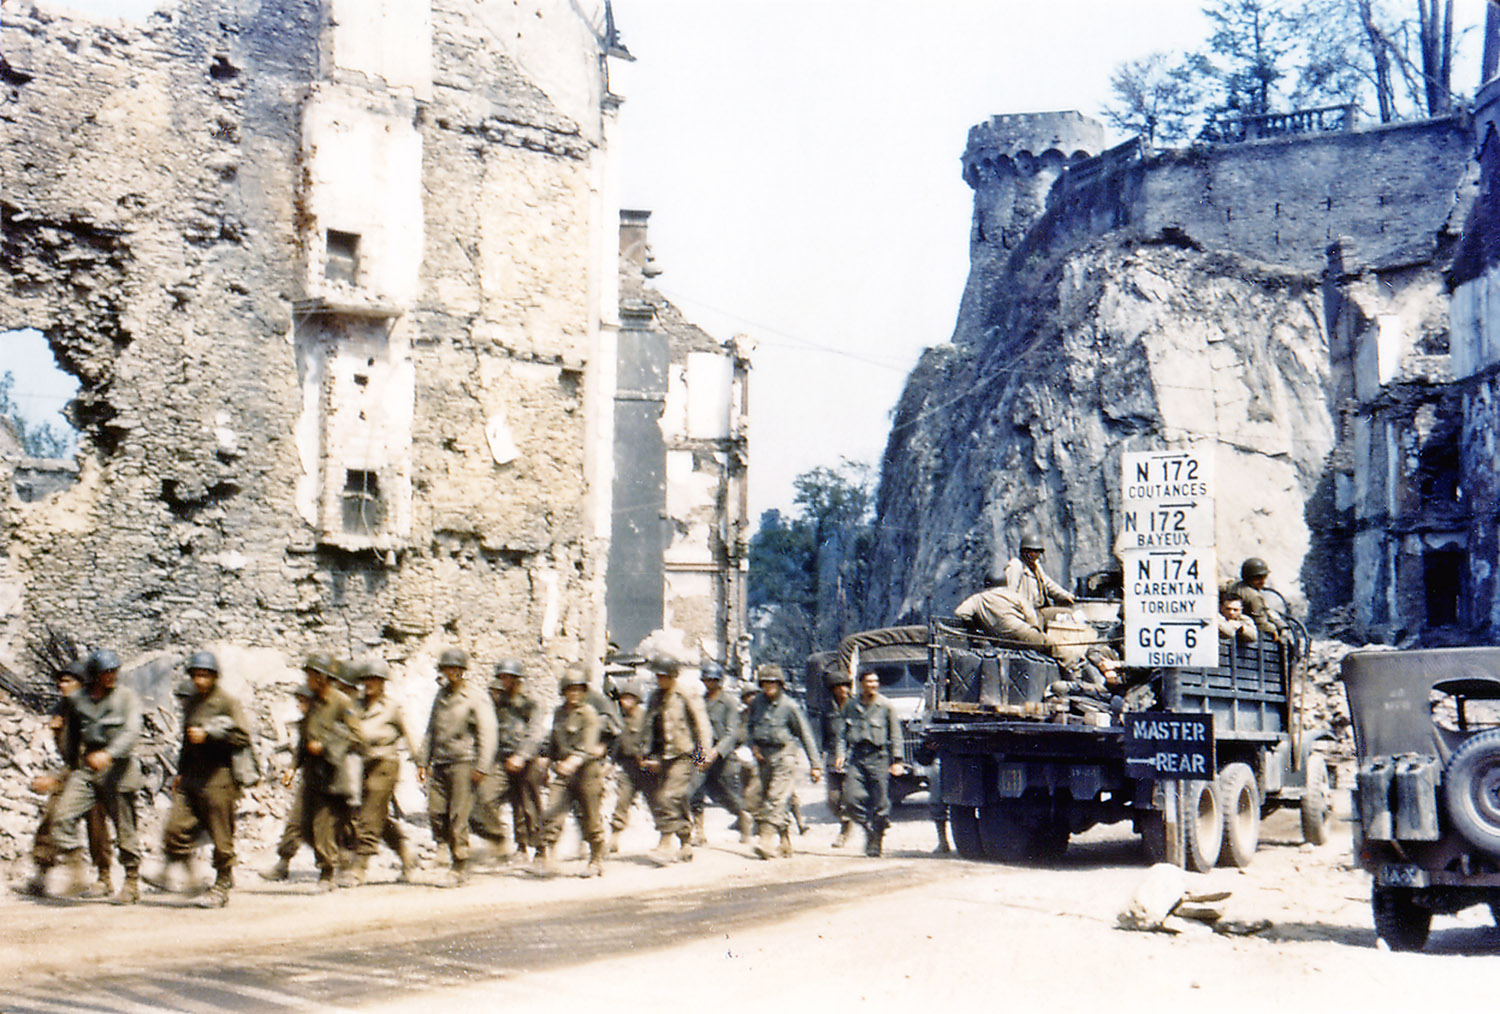 D-Day in color: Photographs from the invasion of Normandy in WWII